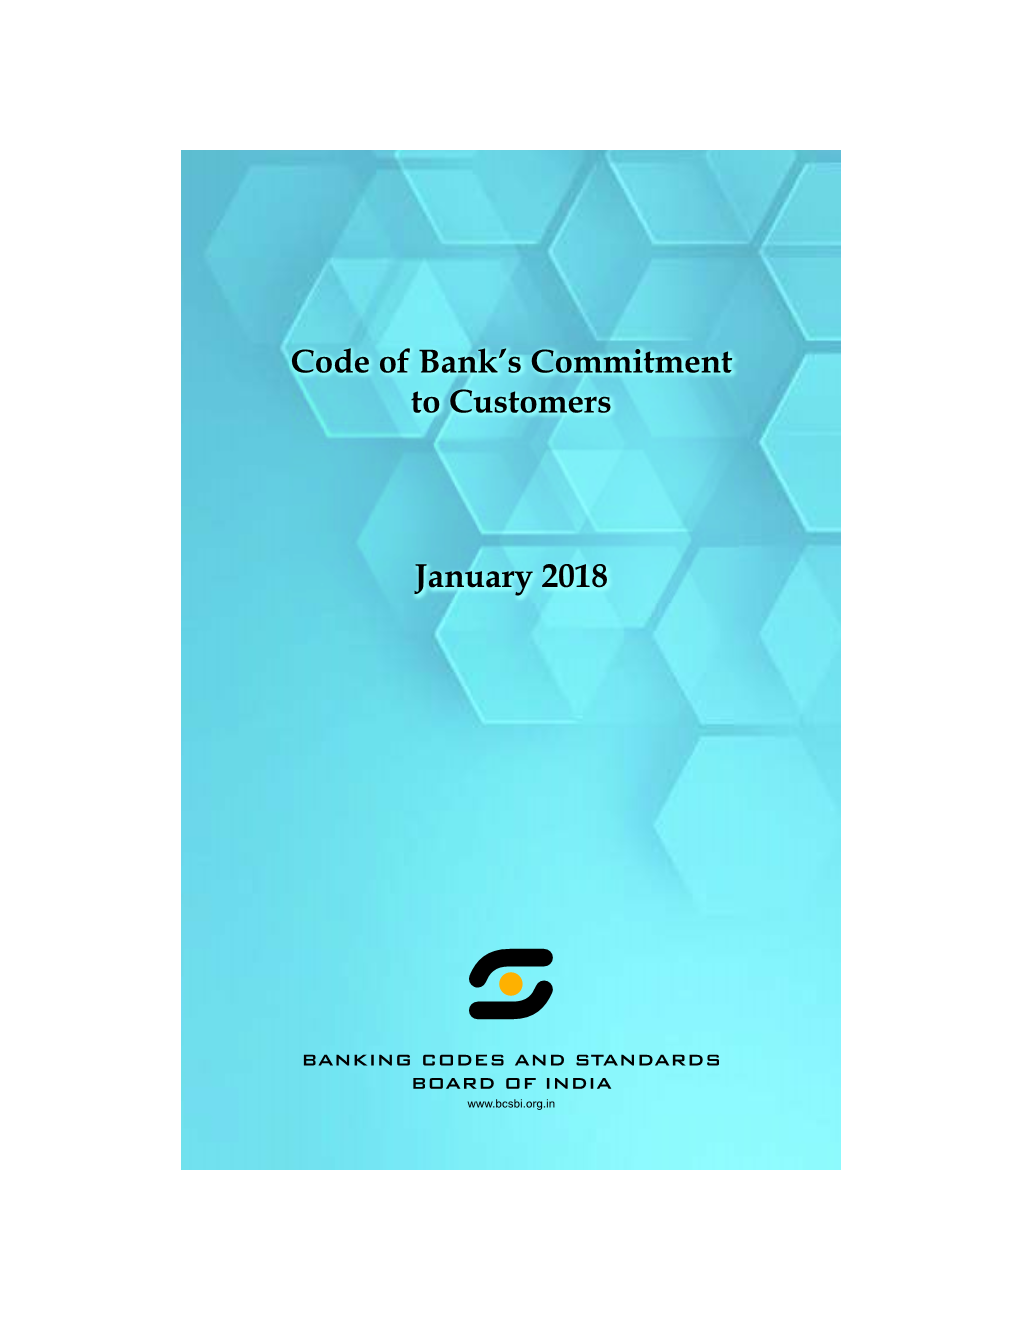 Code of Bank's Commitment to MSME